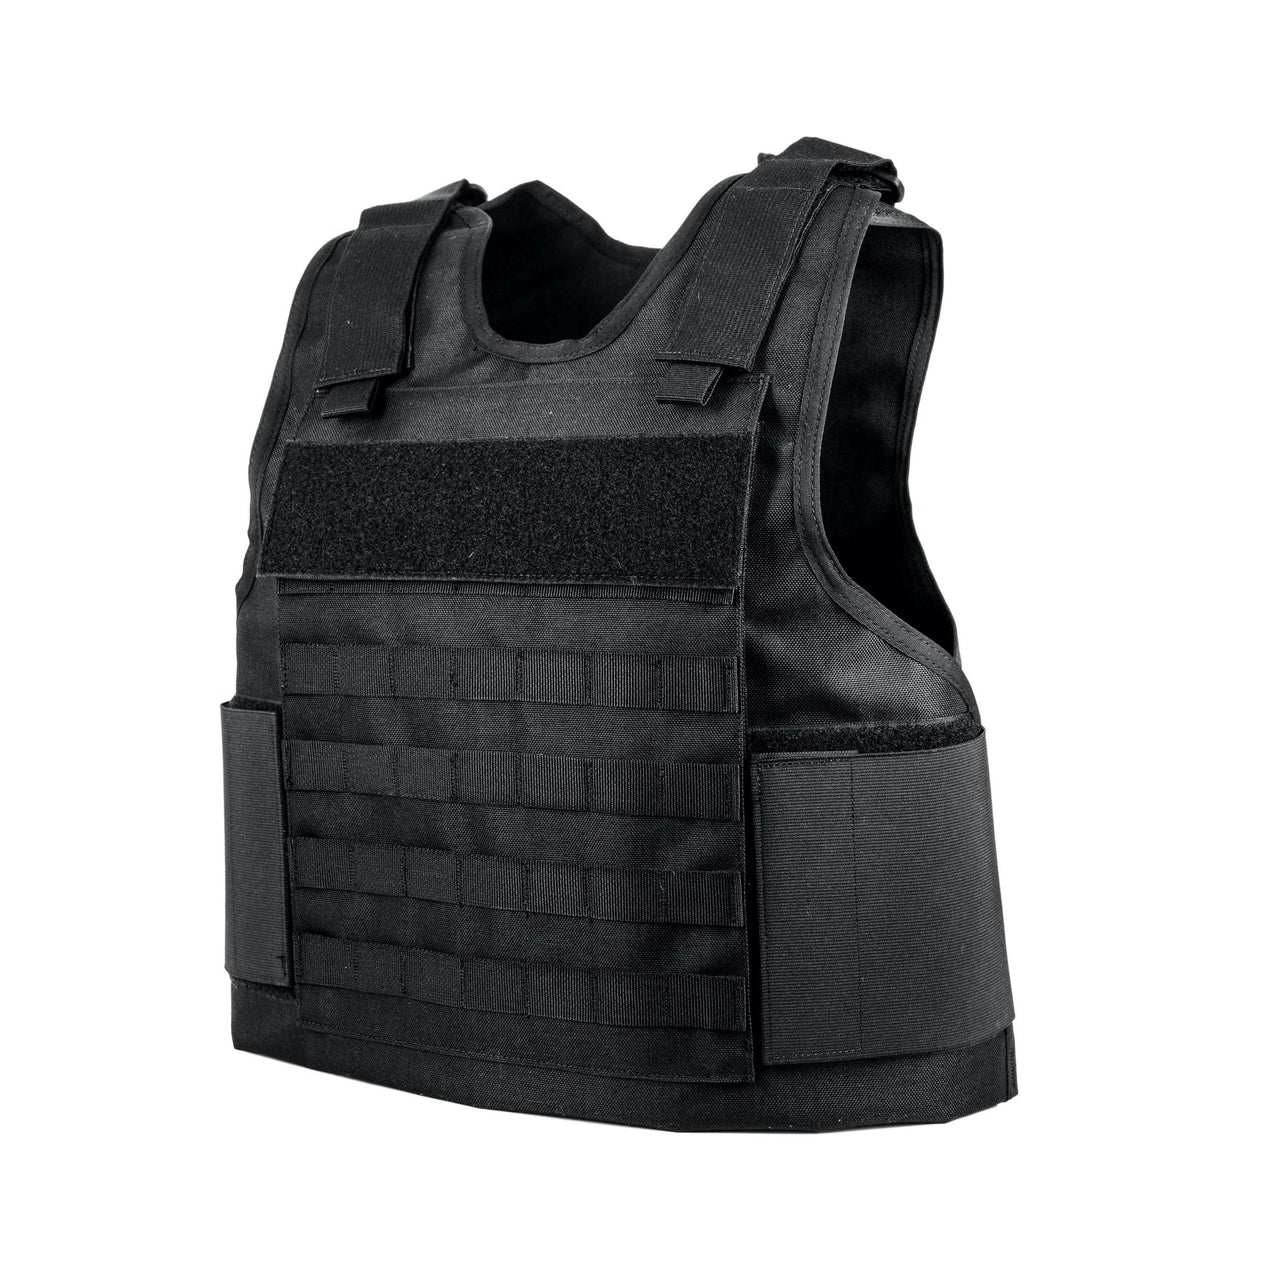 A Body Armor Direct All Star Tactical Enhanced Multi-Threat Vest by Body Armor Direct on a white background.